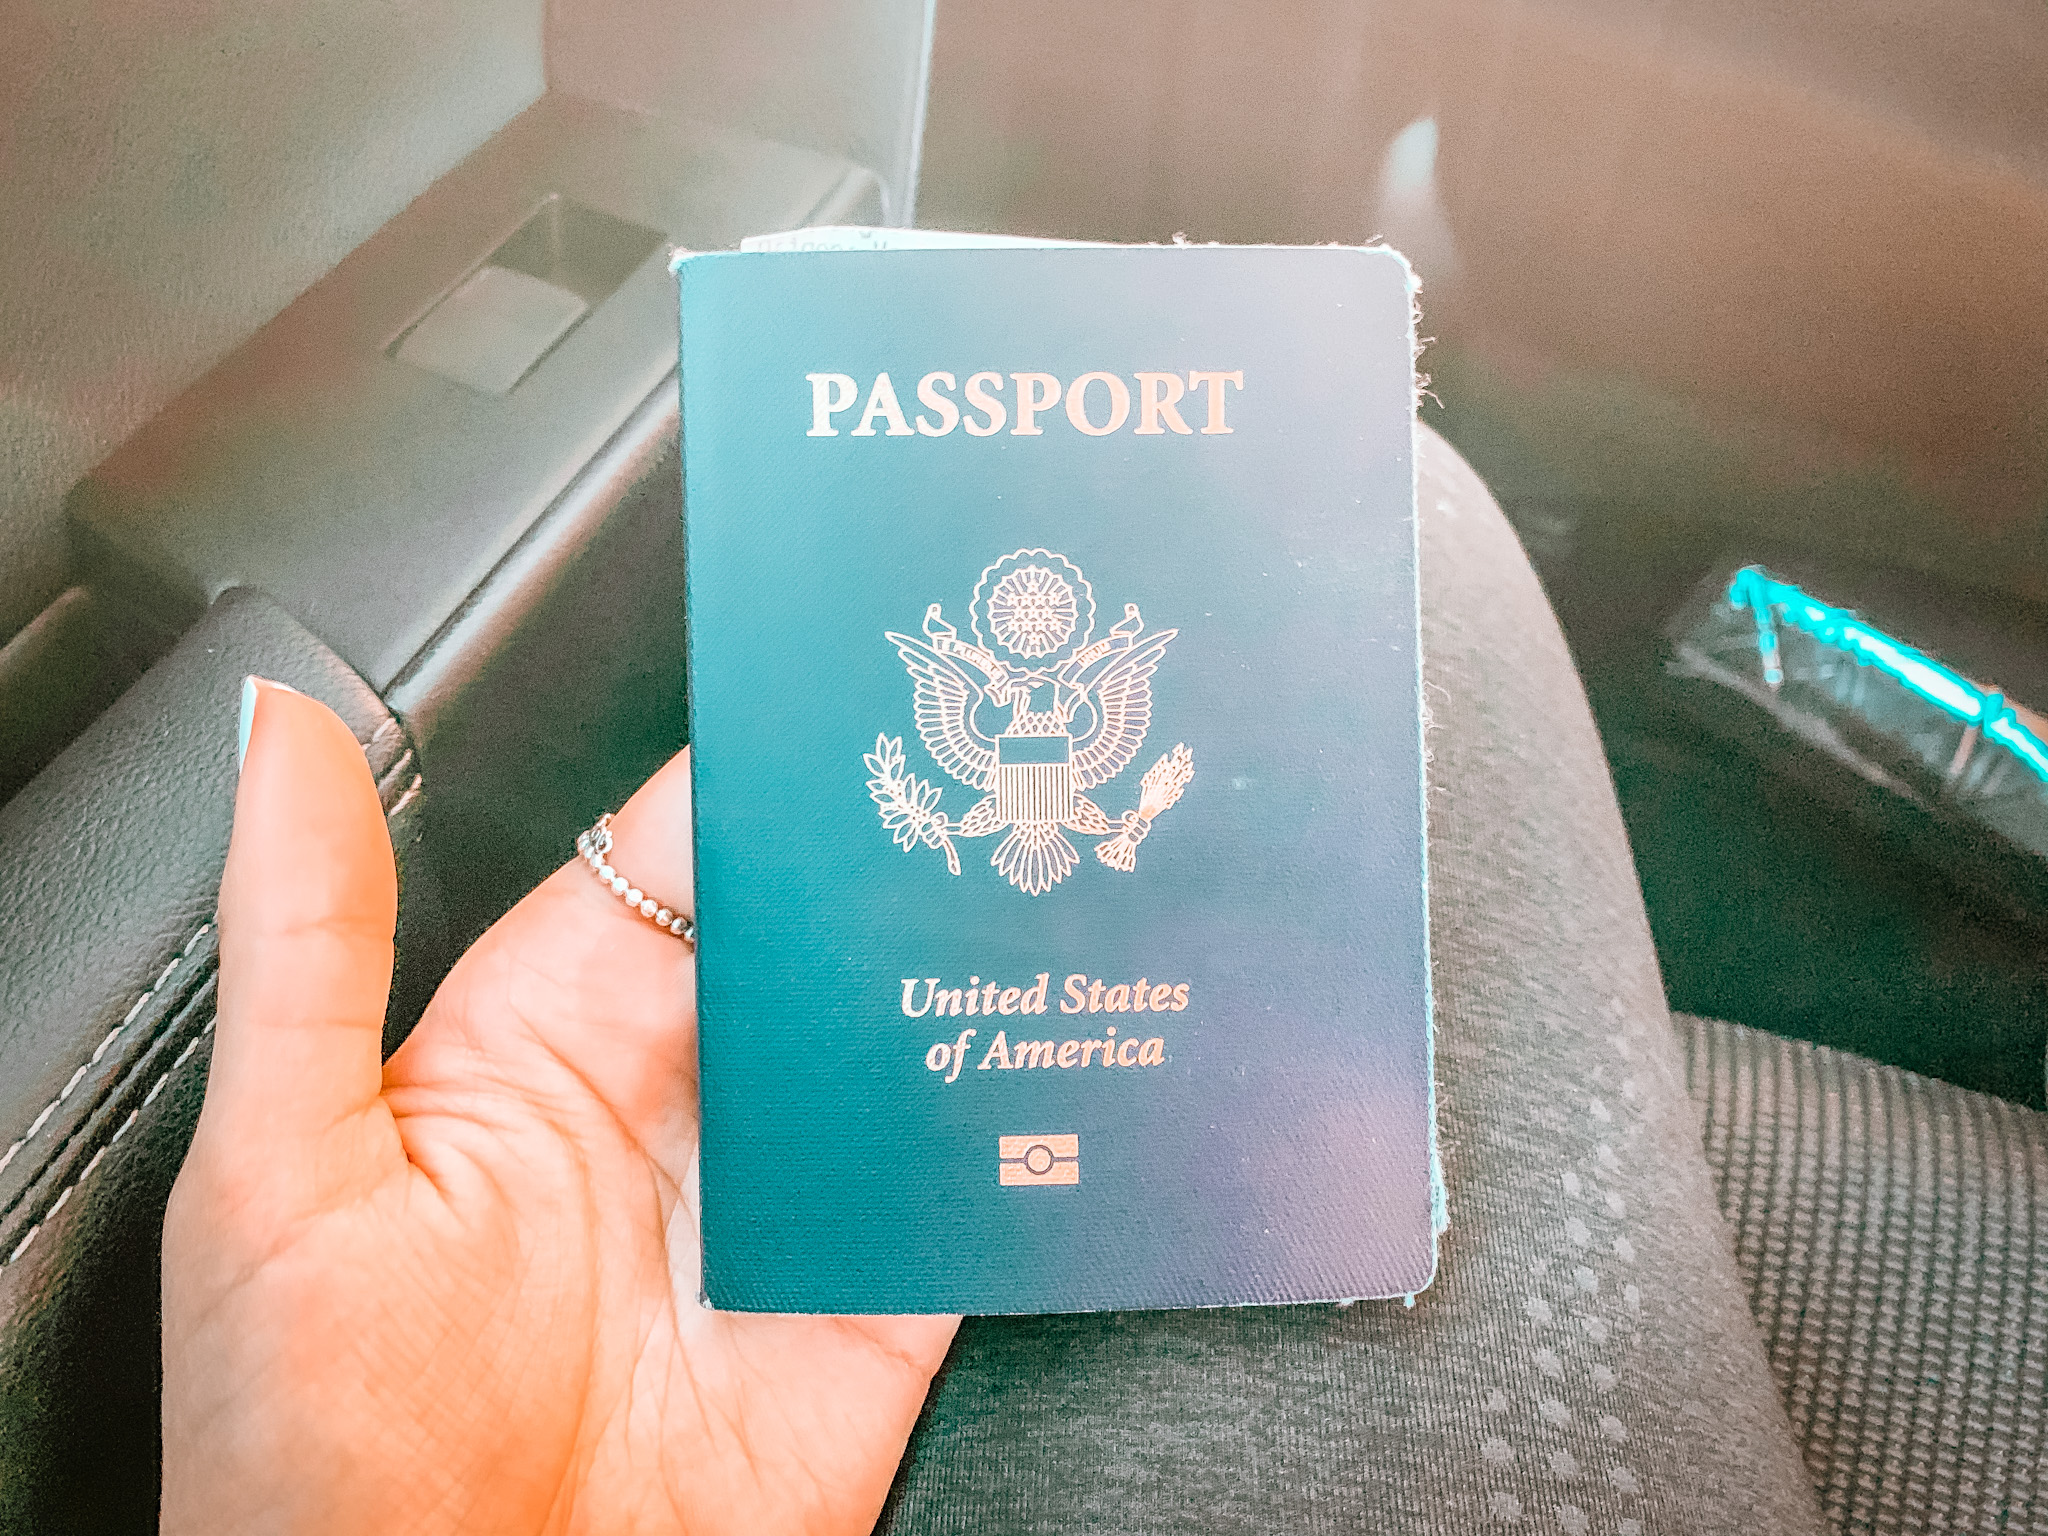 The gold United States seal with an eagle in the center is on the cover of a green American passport